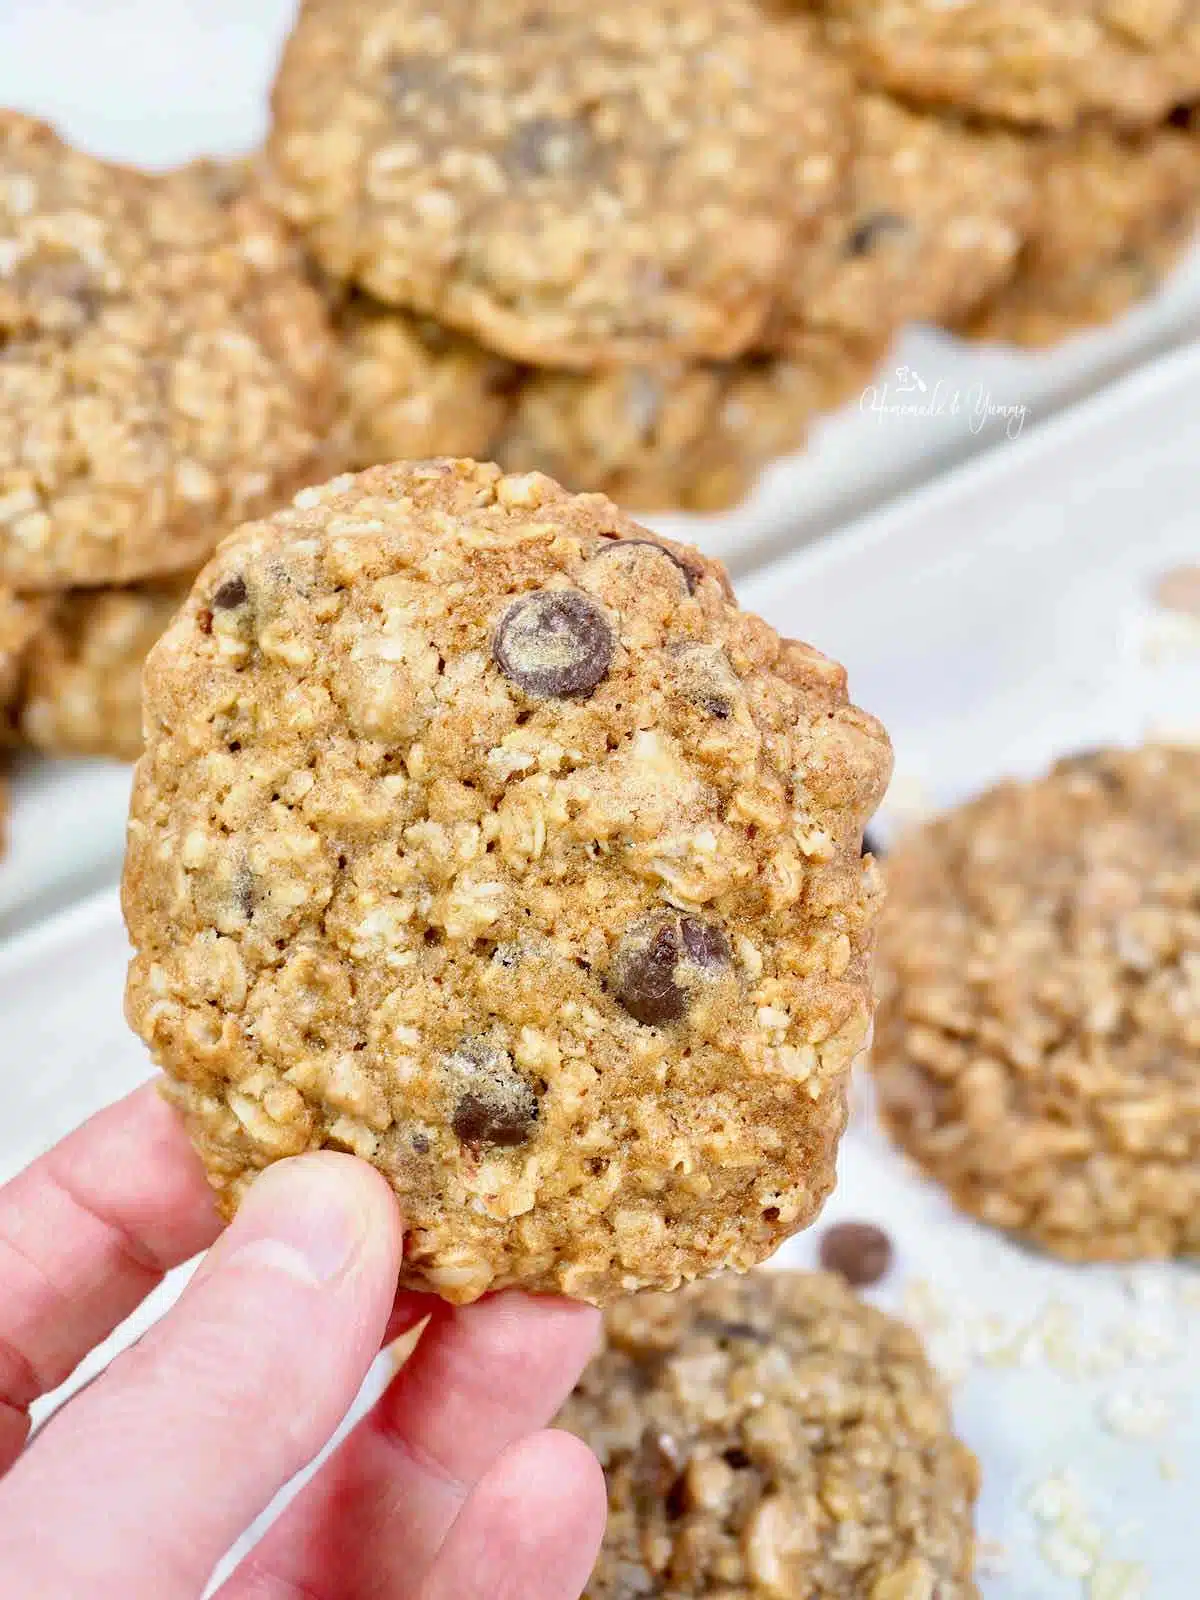 Fresh baked oatmeal chocolate chip cookie.